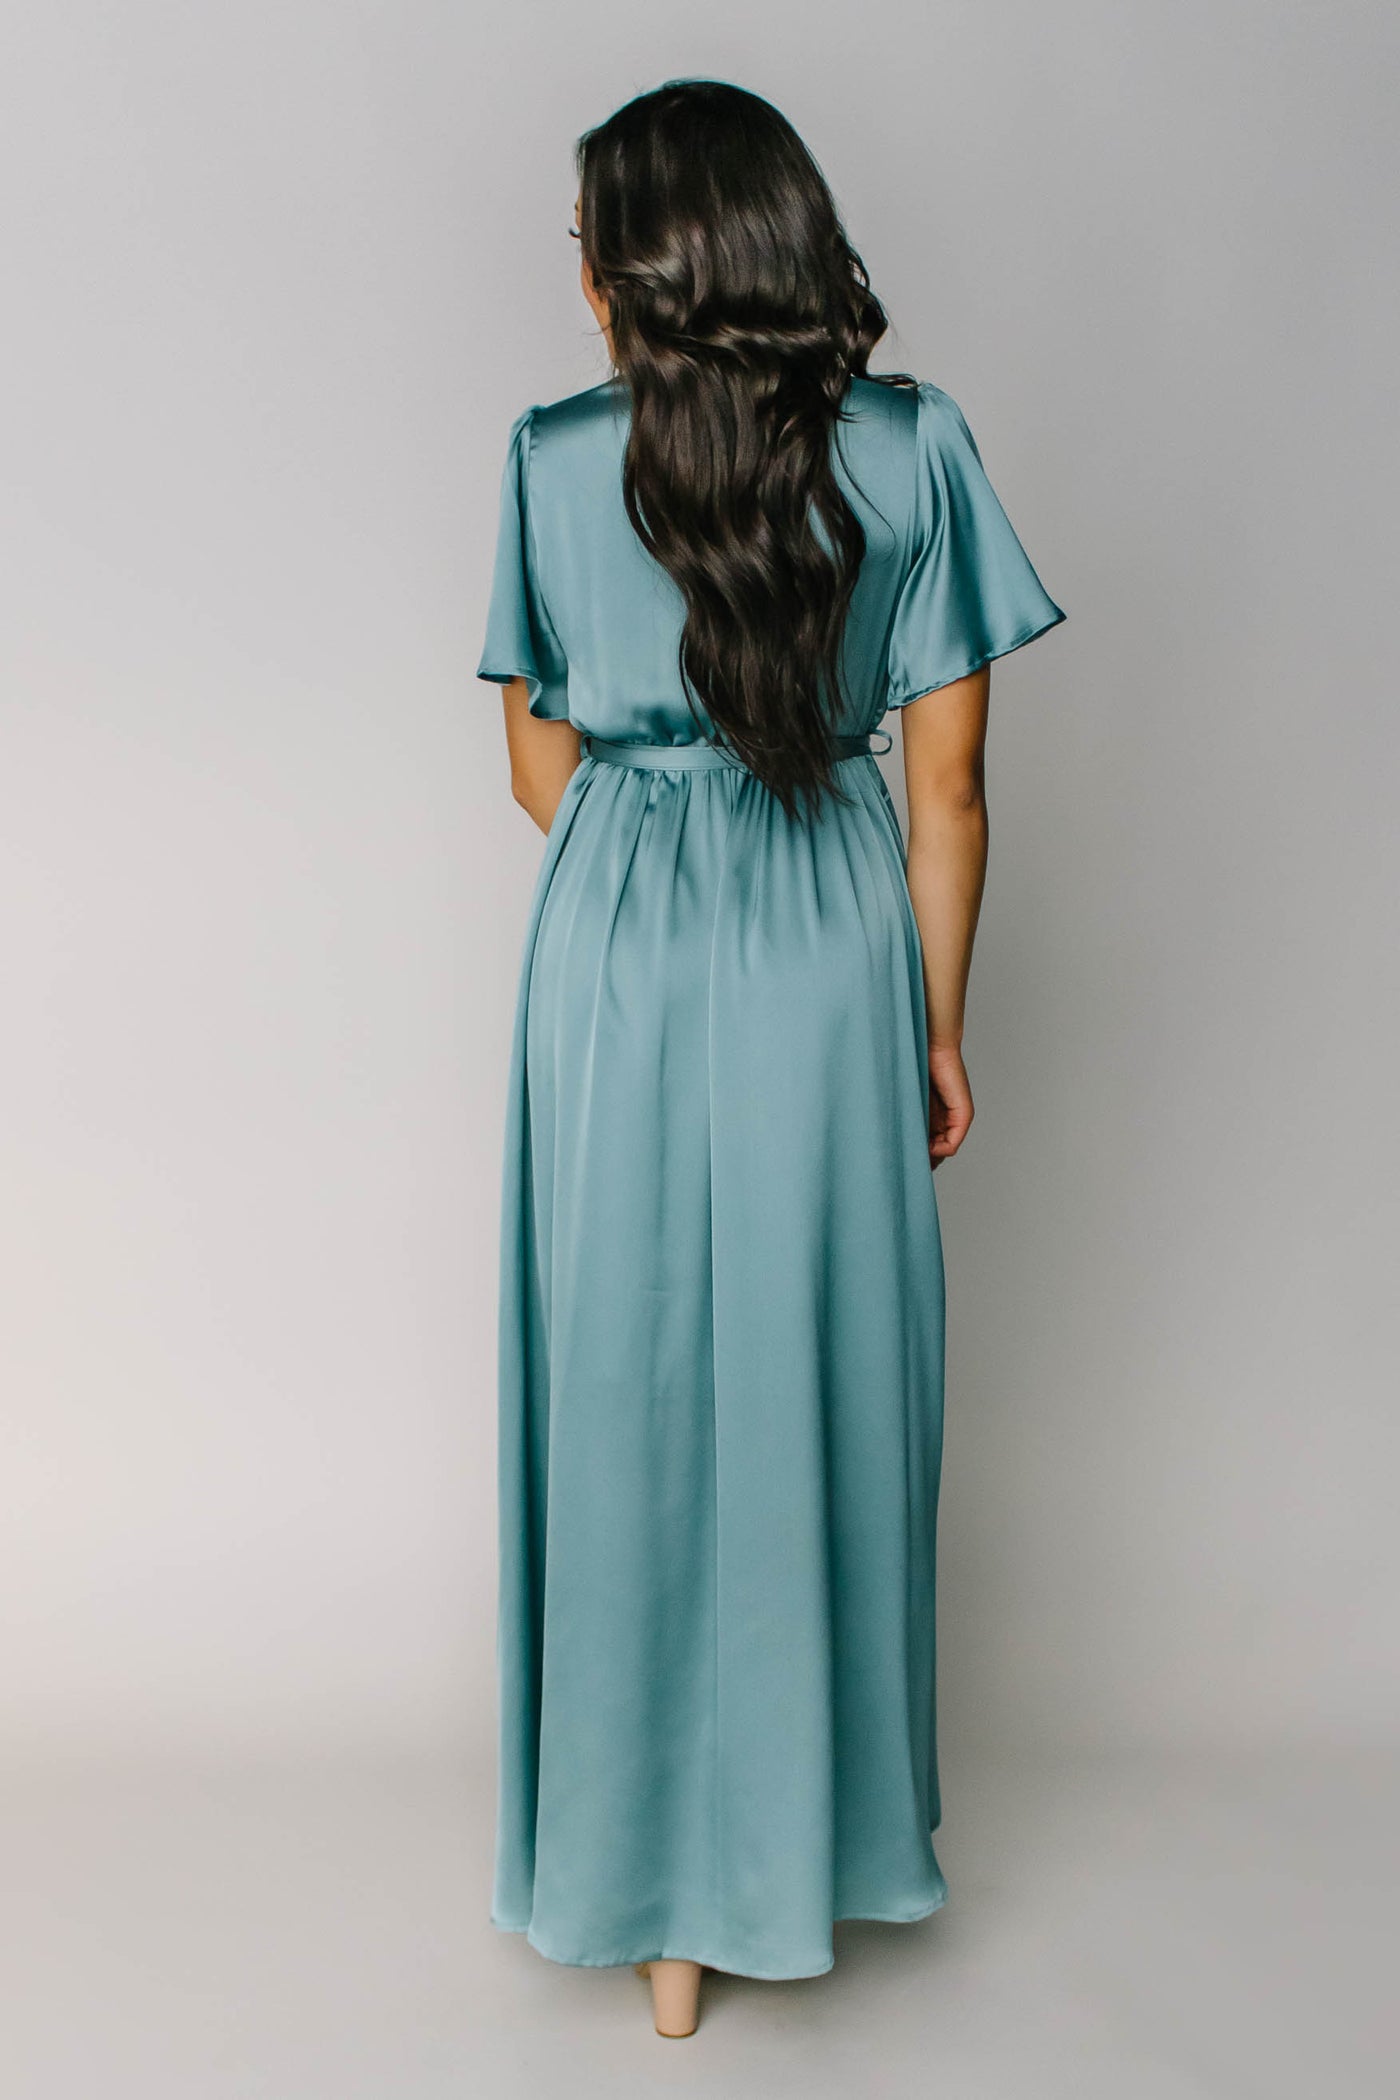 The back of a full length modest bridesmaid dress in a teal blue color with a tied waist and flutter sleeves.